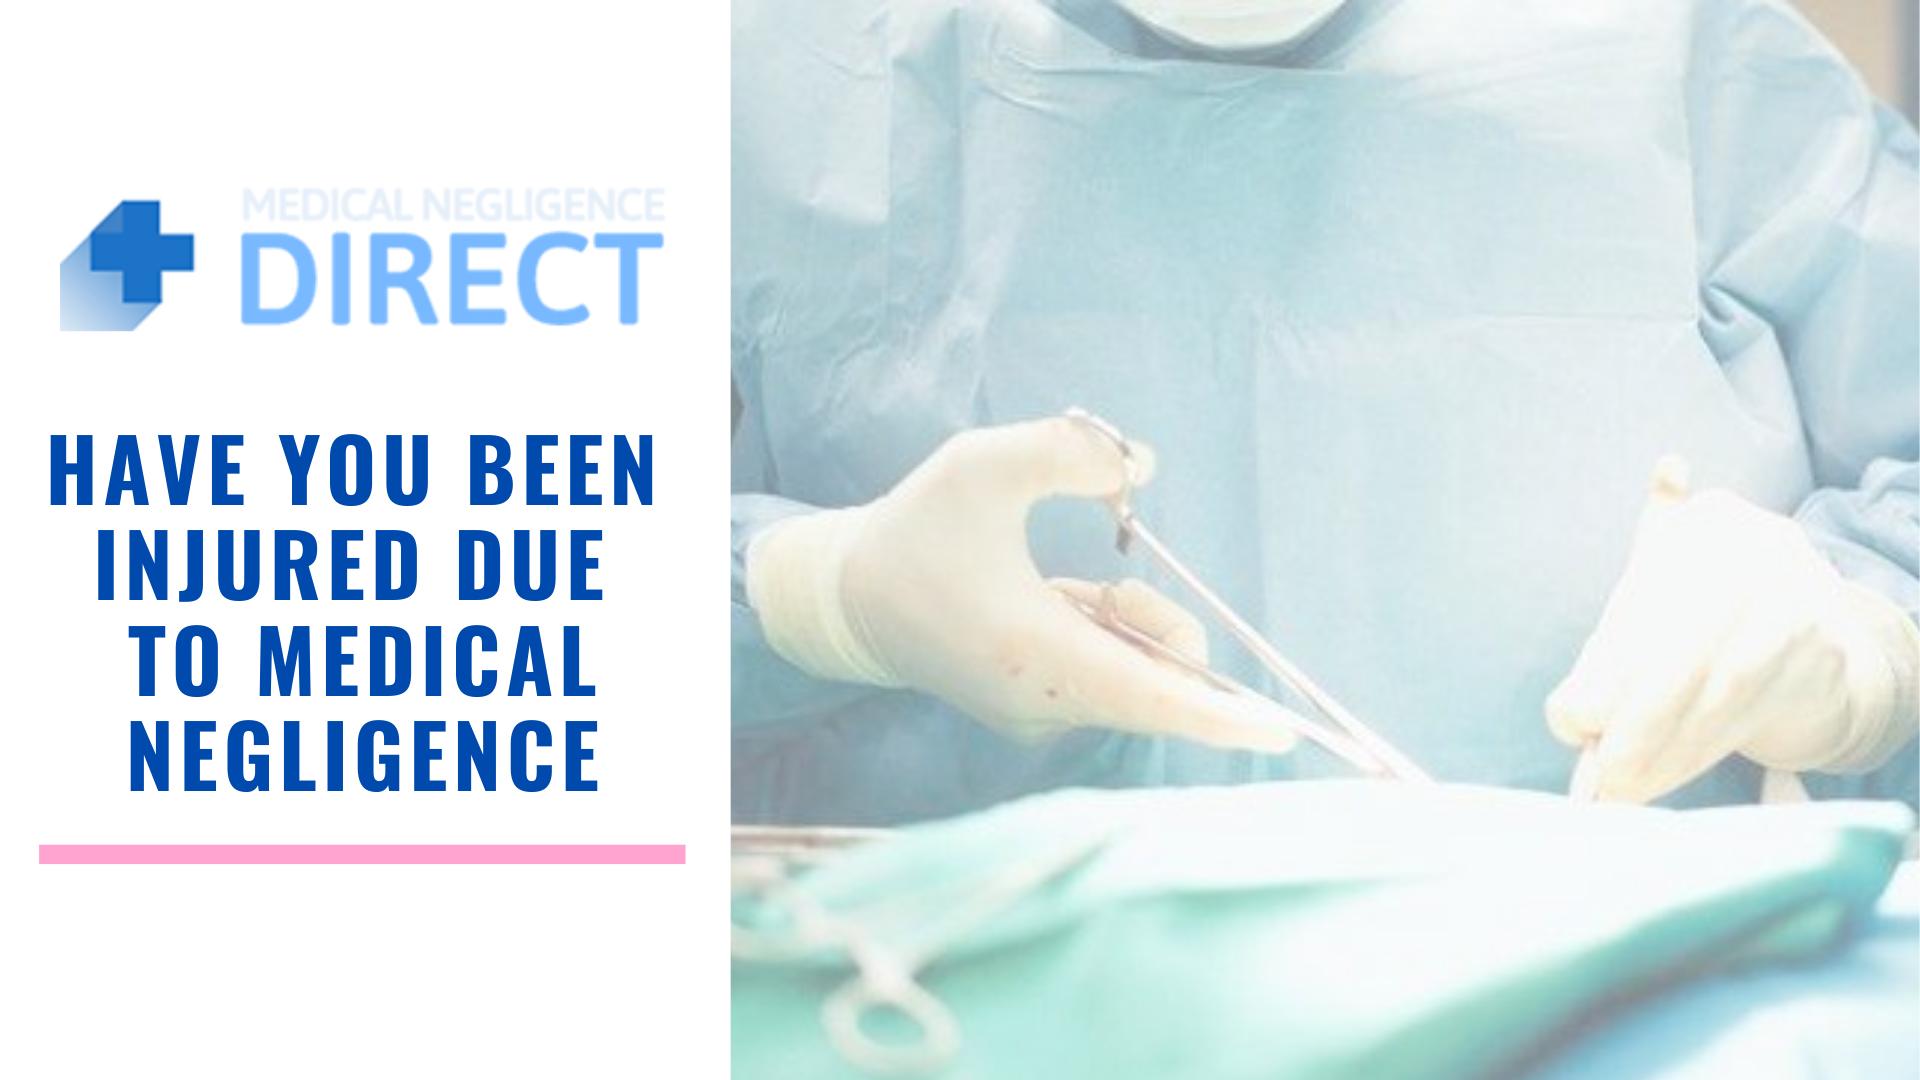 Image - Medical Negligence is caused by the #negligence of the doctor or Health Care. If your doctor has failed to su...